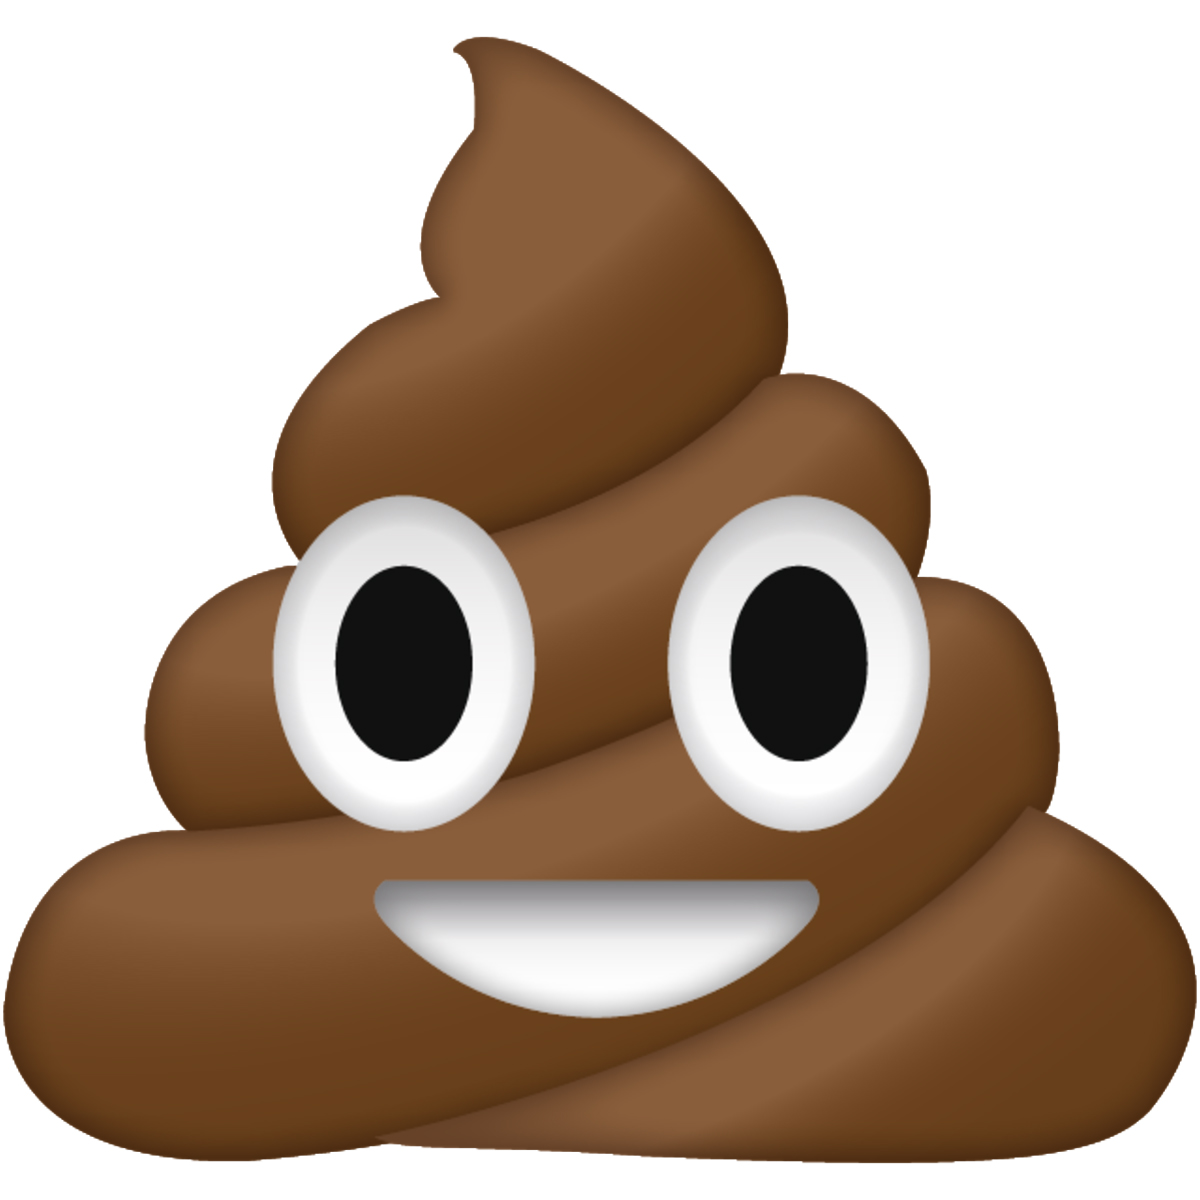 The Smiling Poop Emoji Conveys What Words Never Could - ELEPHANT